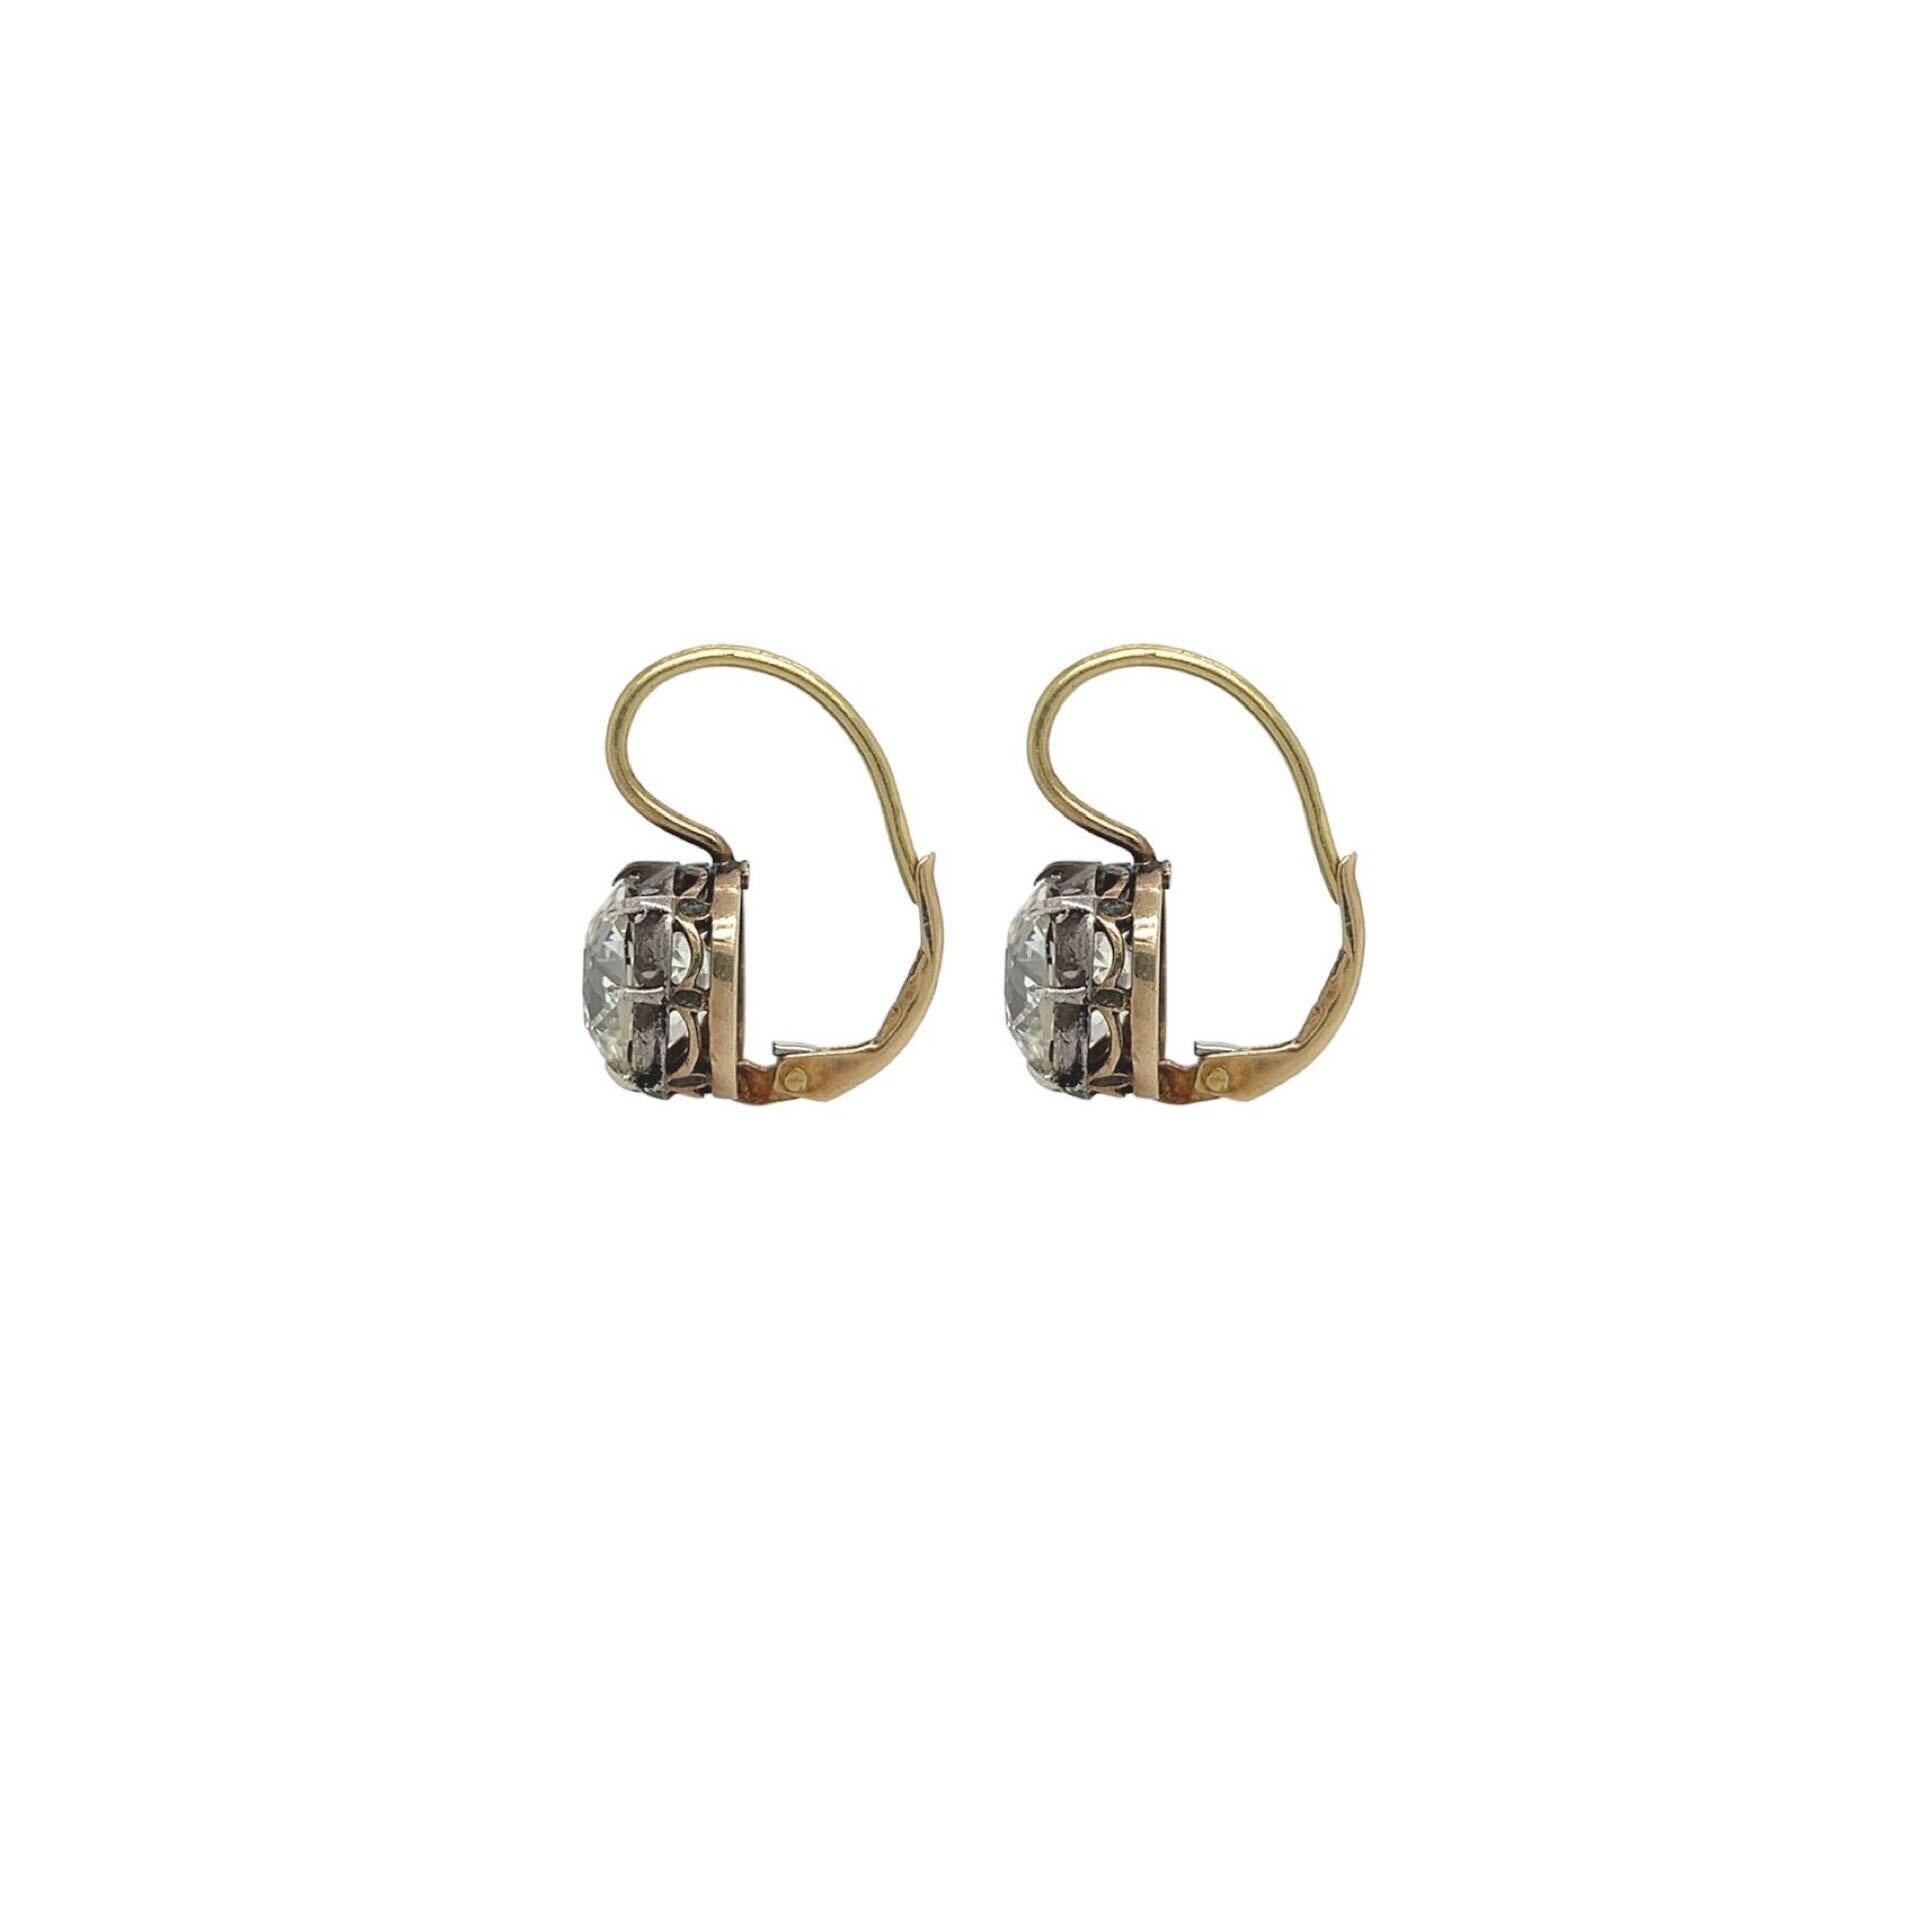 A pair of silver topped gold and diamond earrings.  One is set with an old mine cut diamond weighing 3.26 carats and the other is set with an old mind cut diamond weighing 3.53 carats.